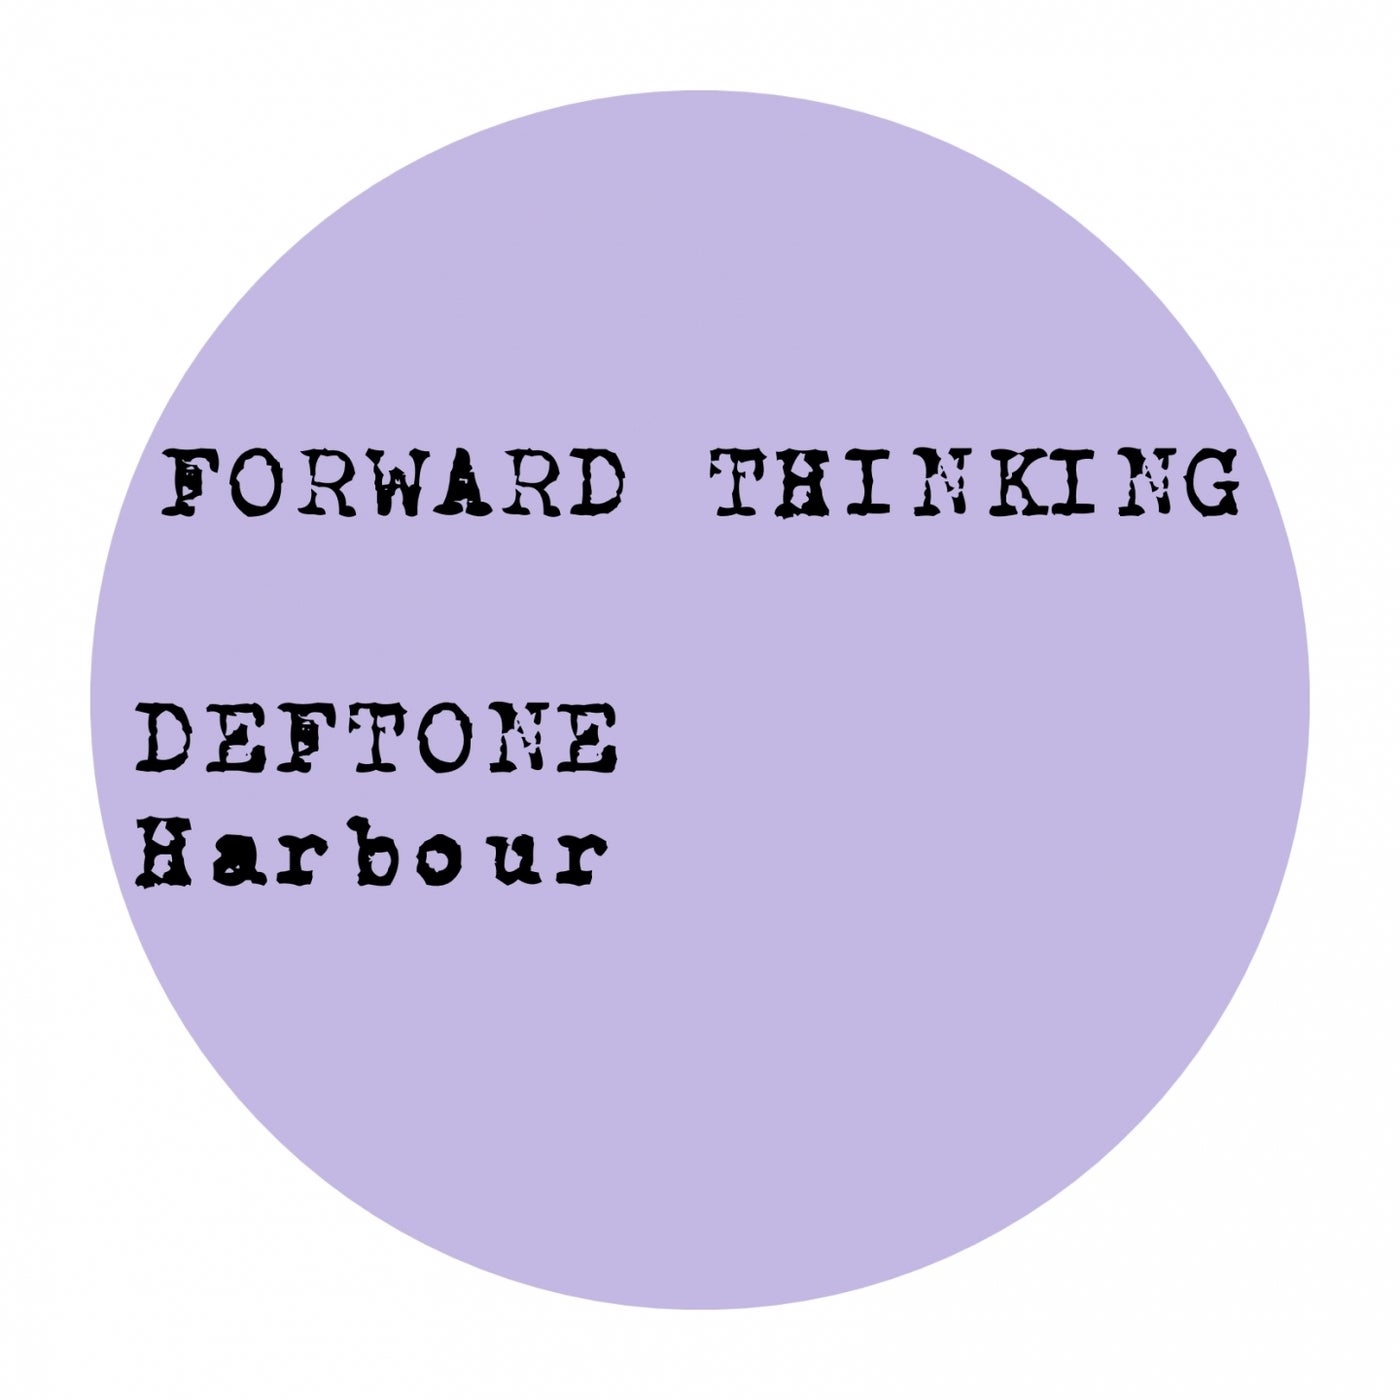 Thinking ahead. Deftone - Love and Happiness (Original Mix).mp3.